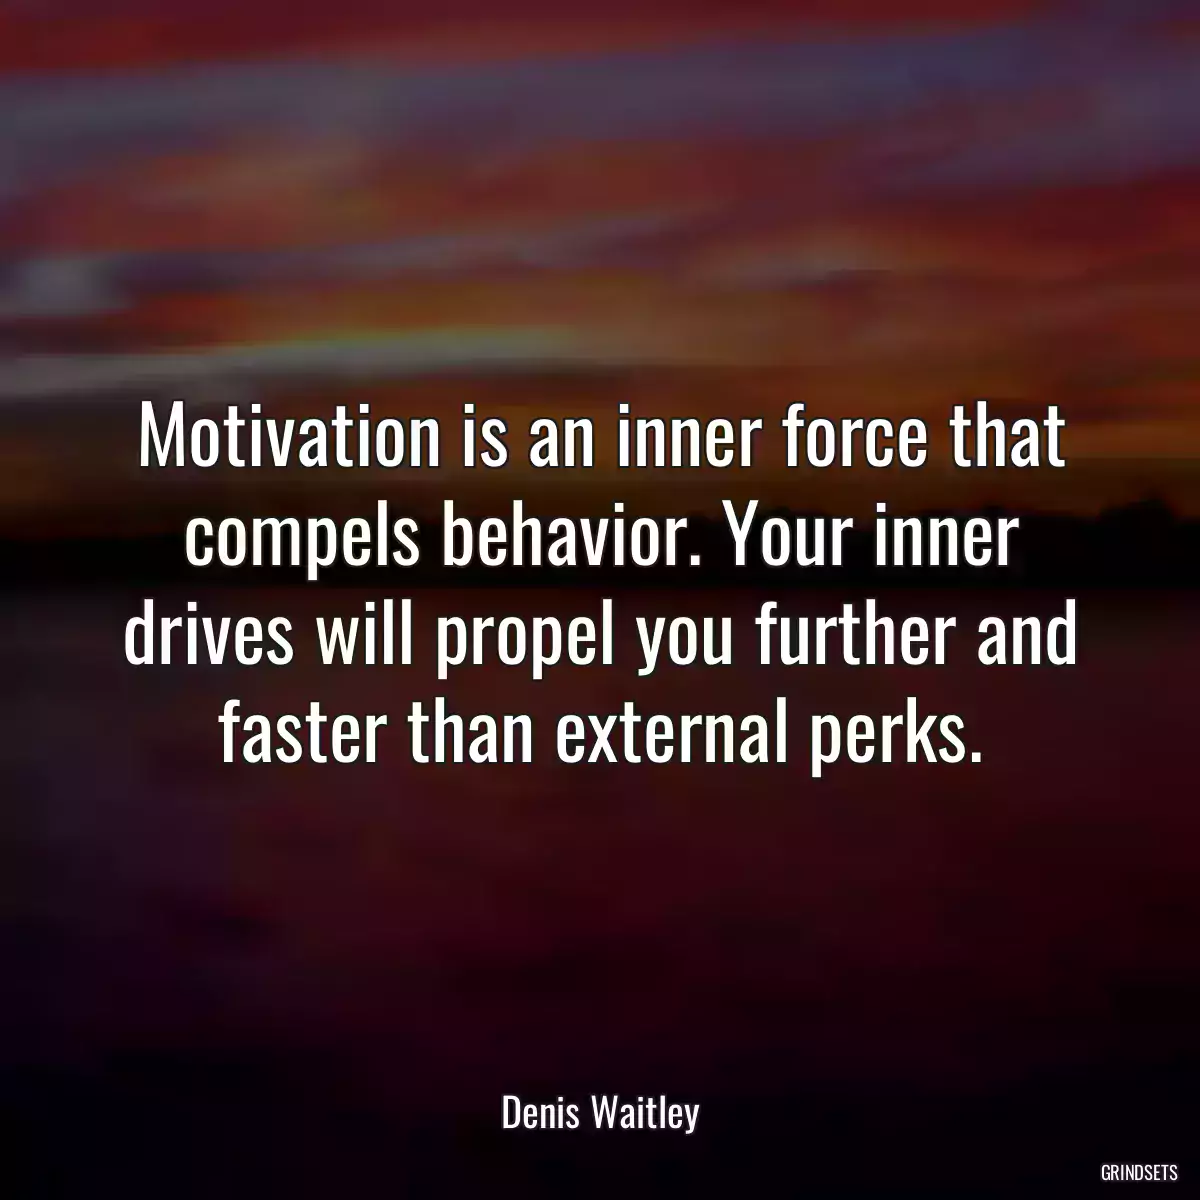 Motivation is an inner force that compels behavior. Your inner drives will propel you further and faster than external perks.